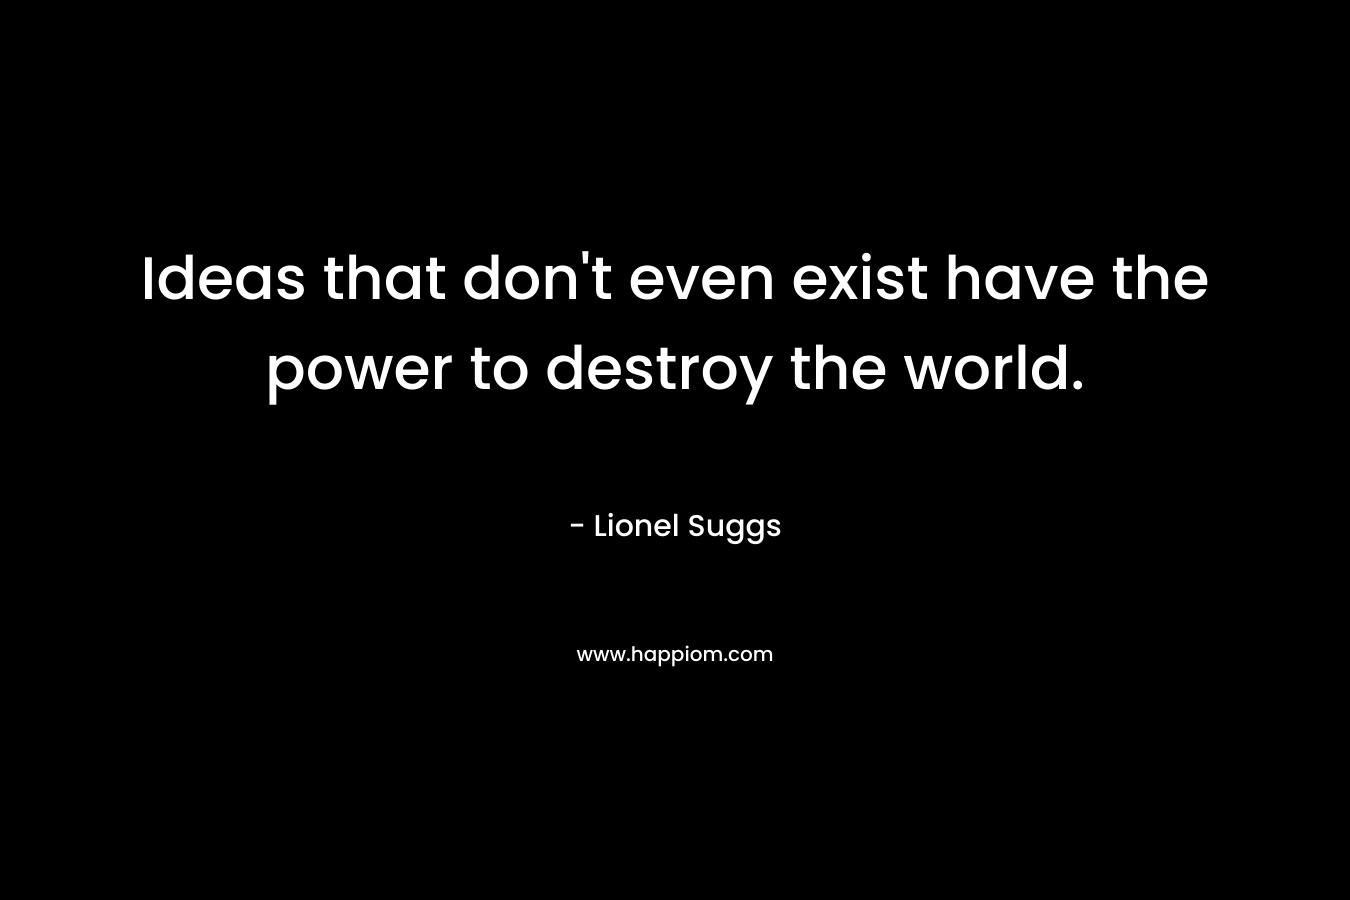 Ideas that don't even exist have the power to destroy the world.